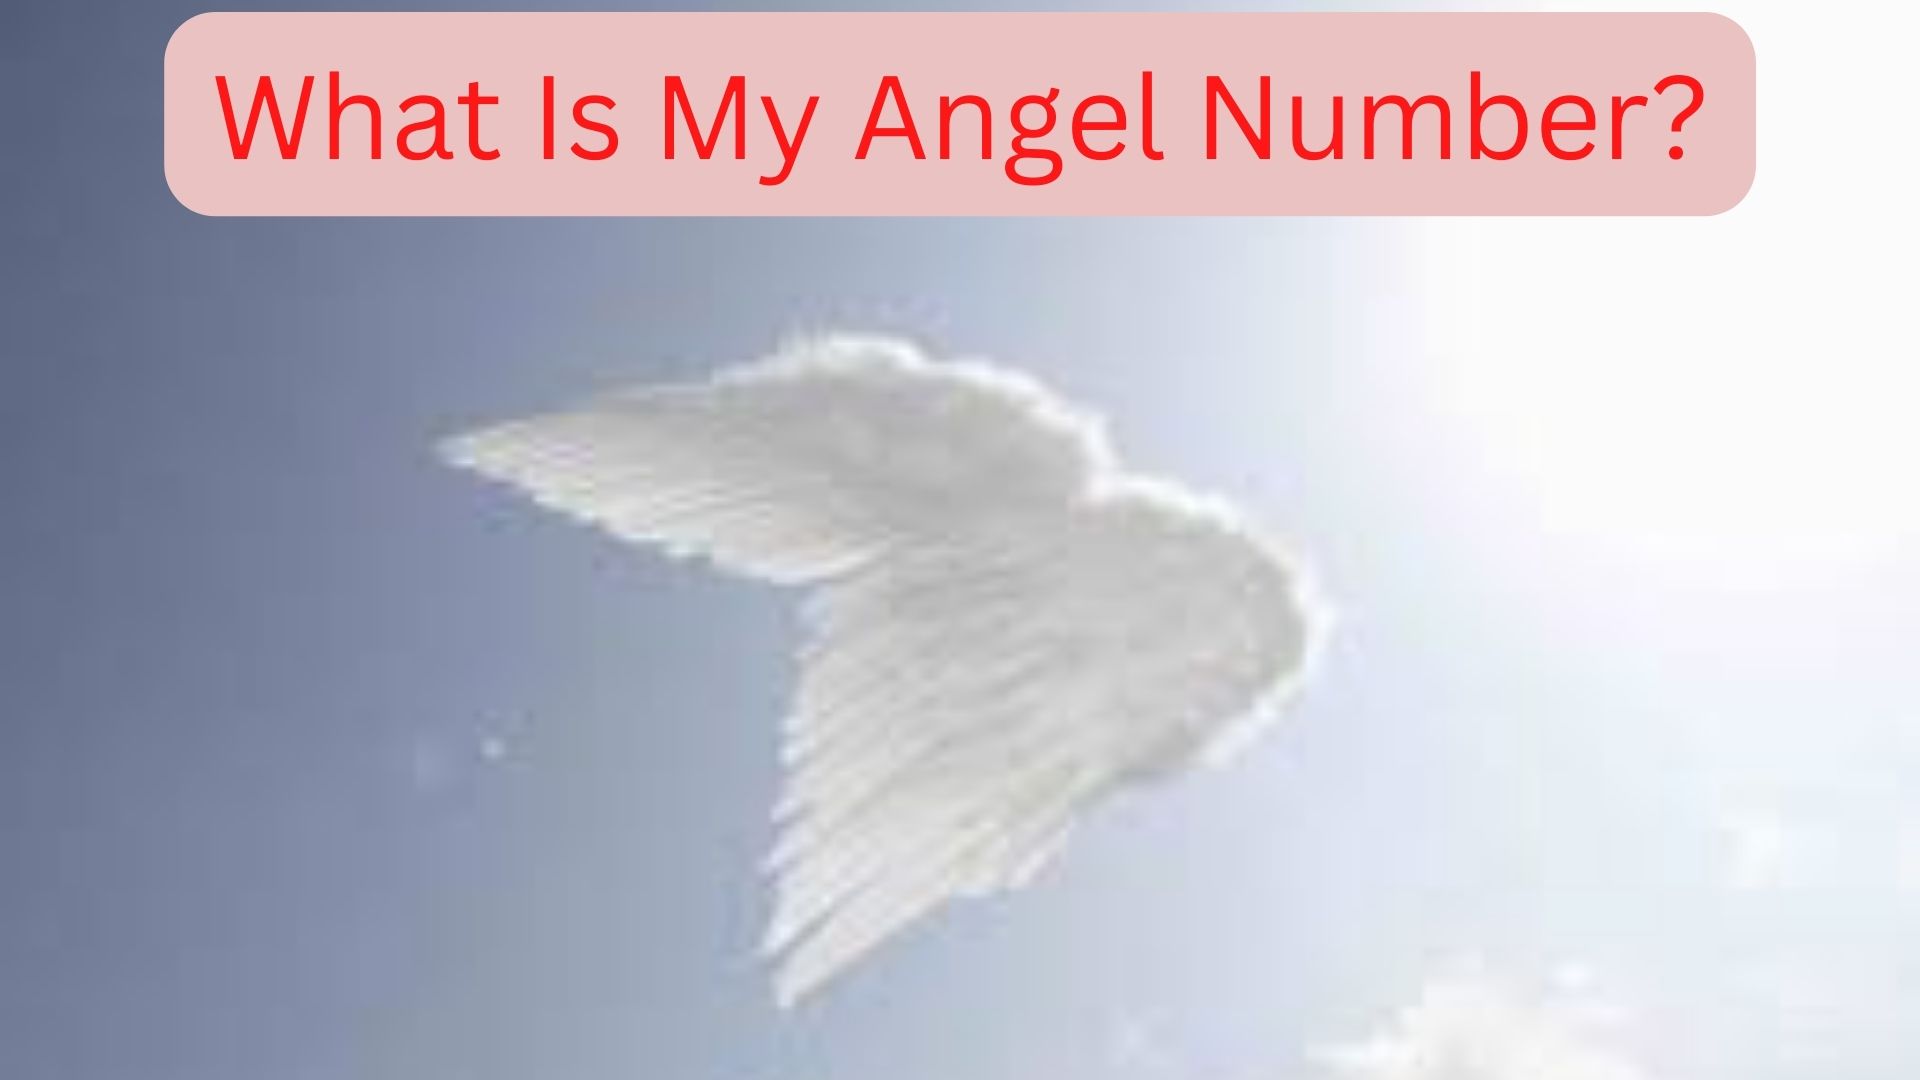 What Is My Angel Number?